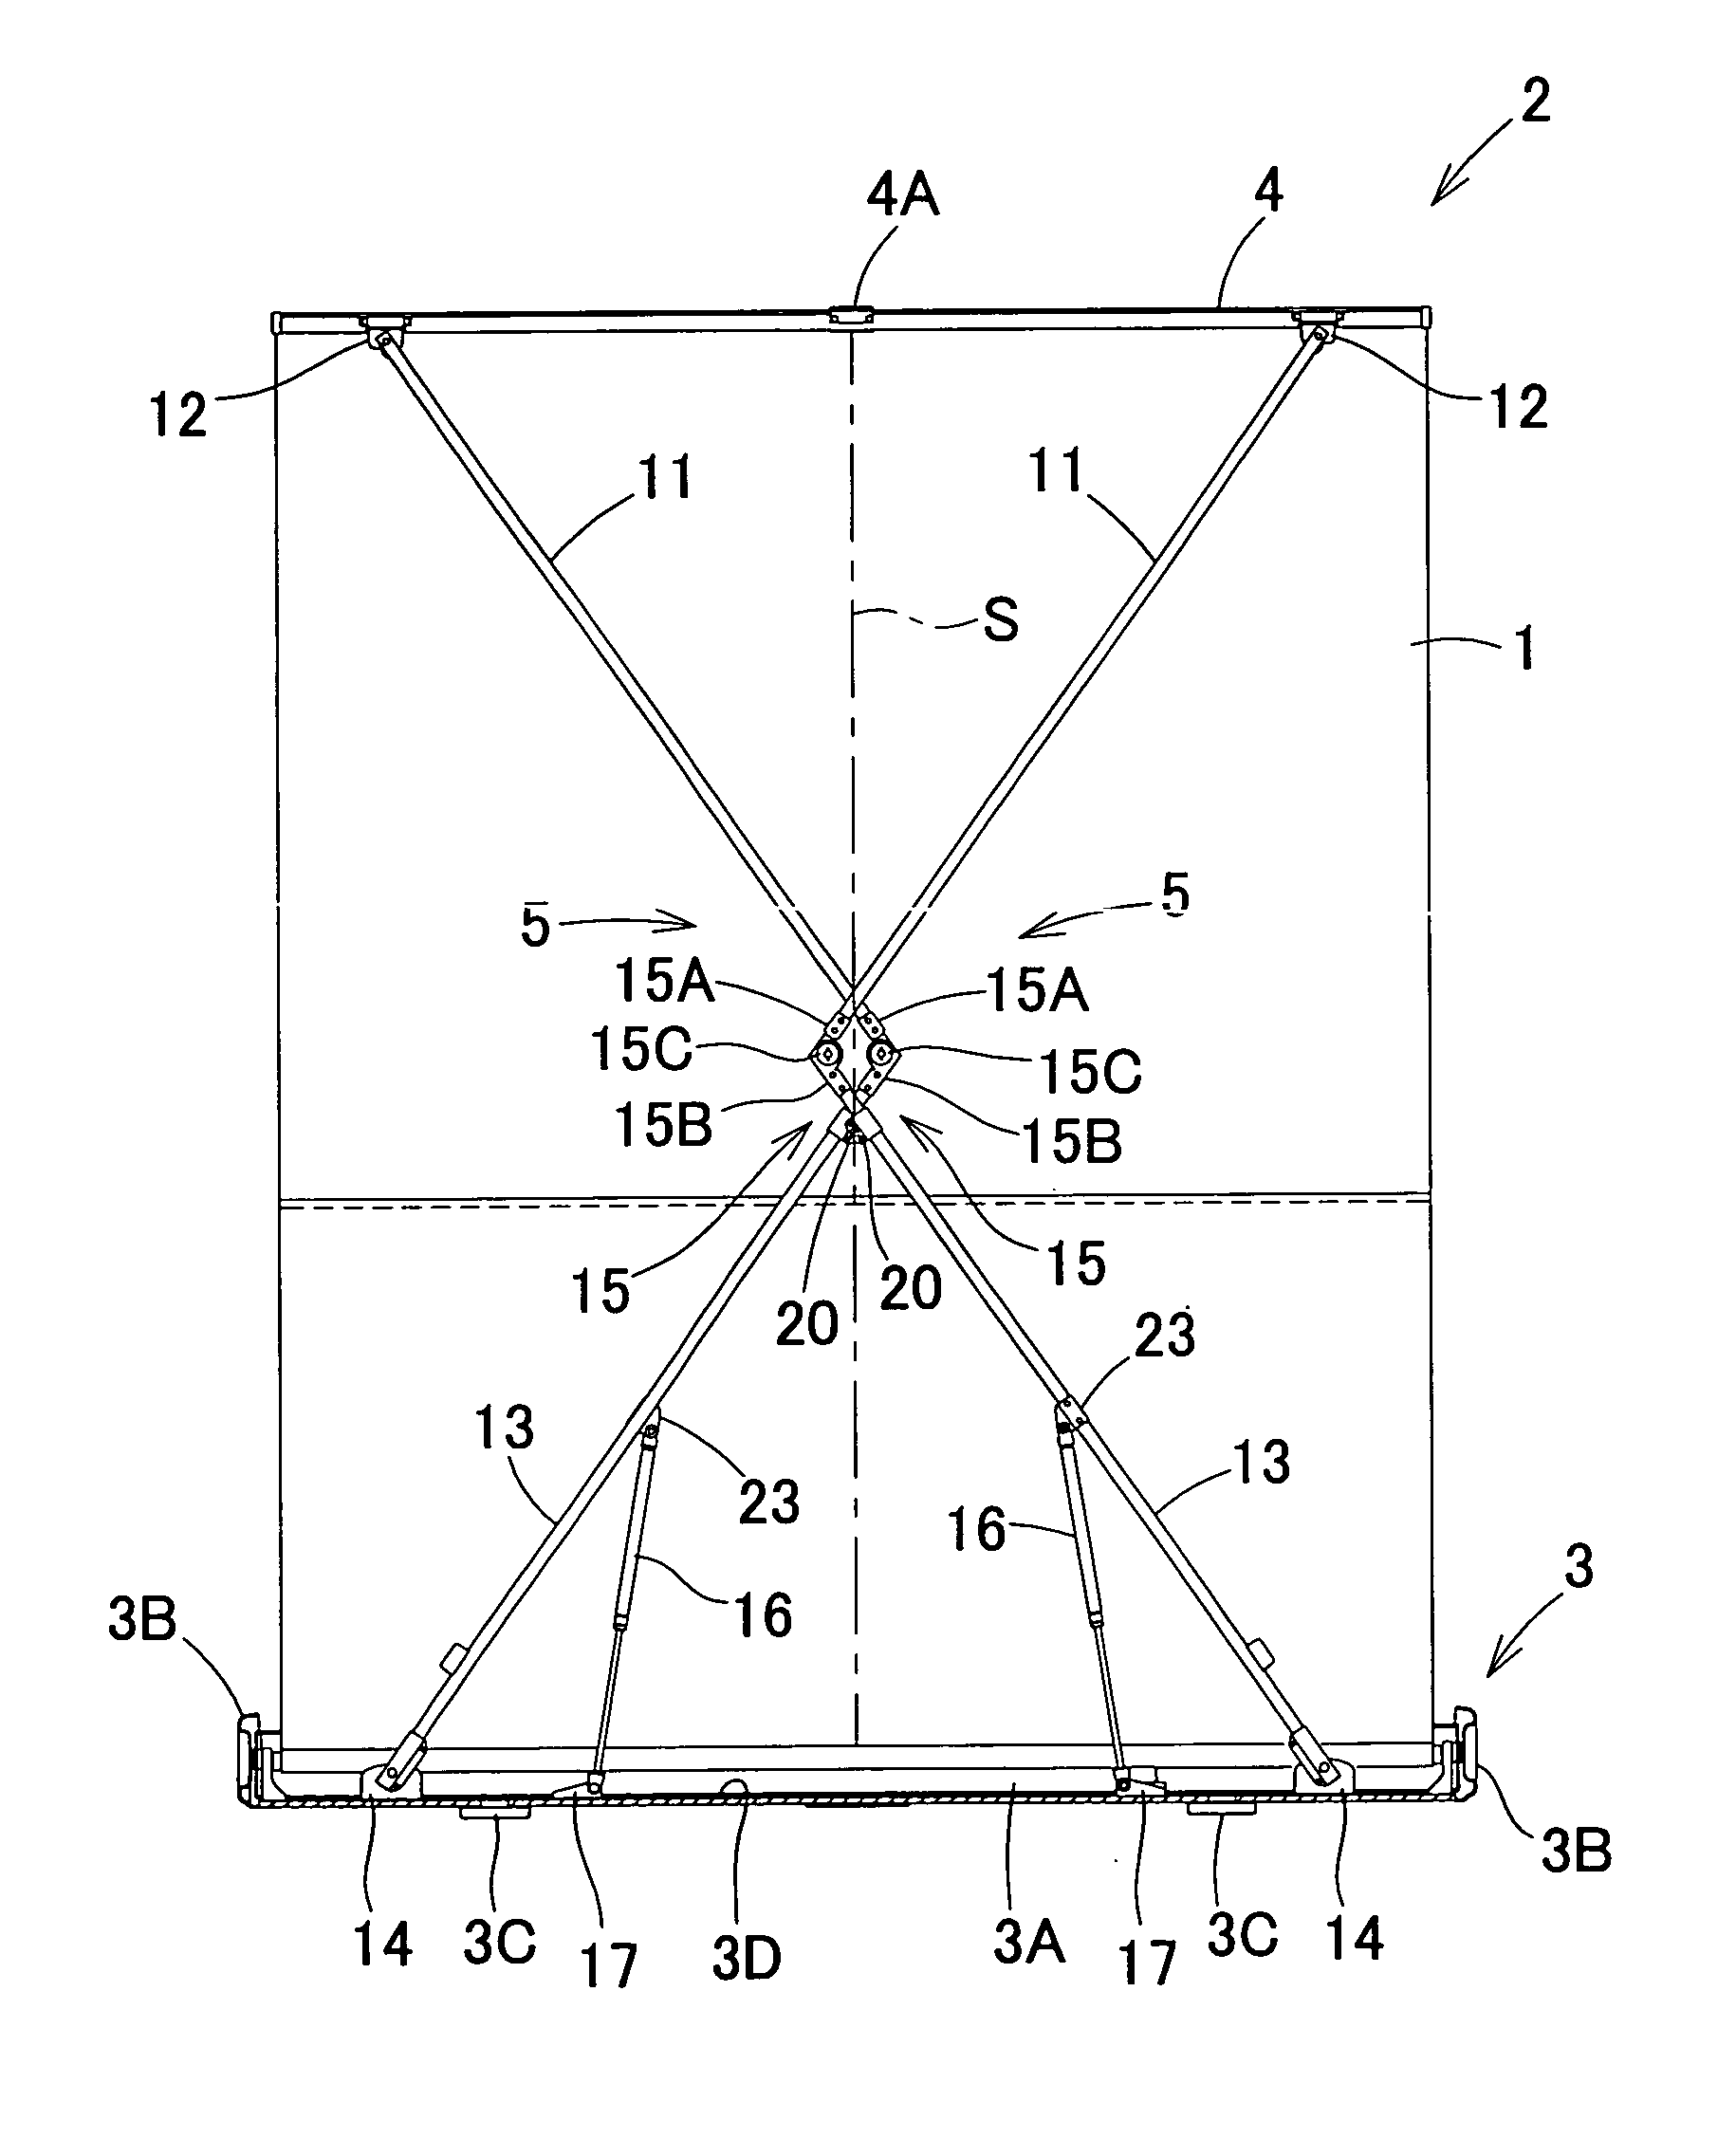 Self-contained manual lifting screen